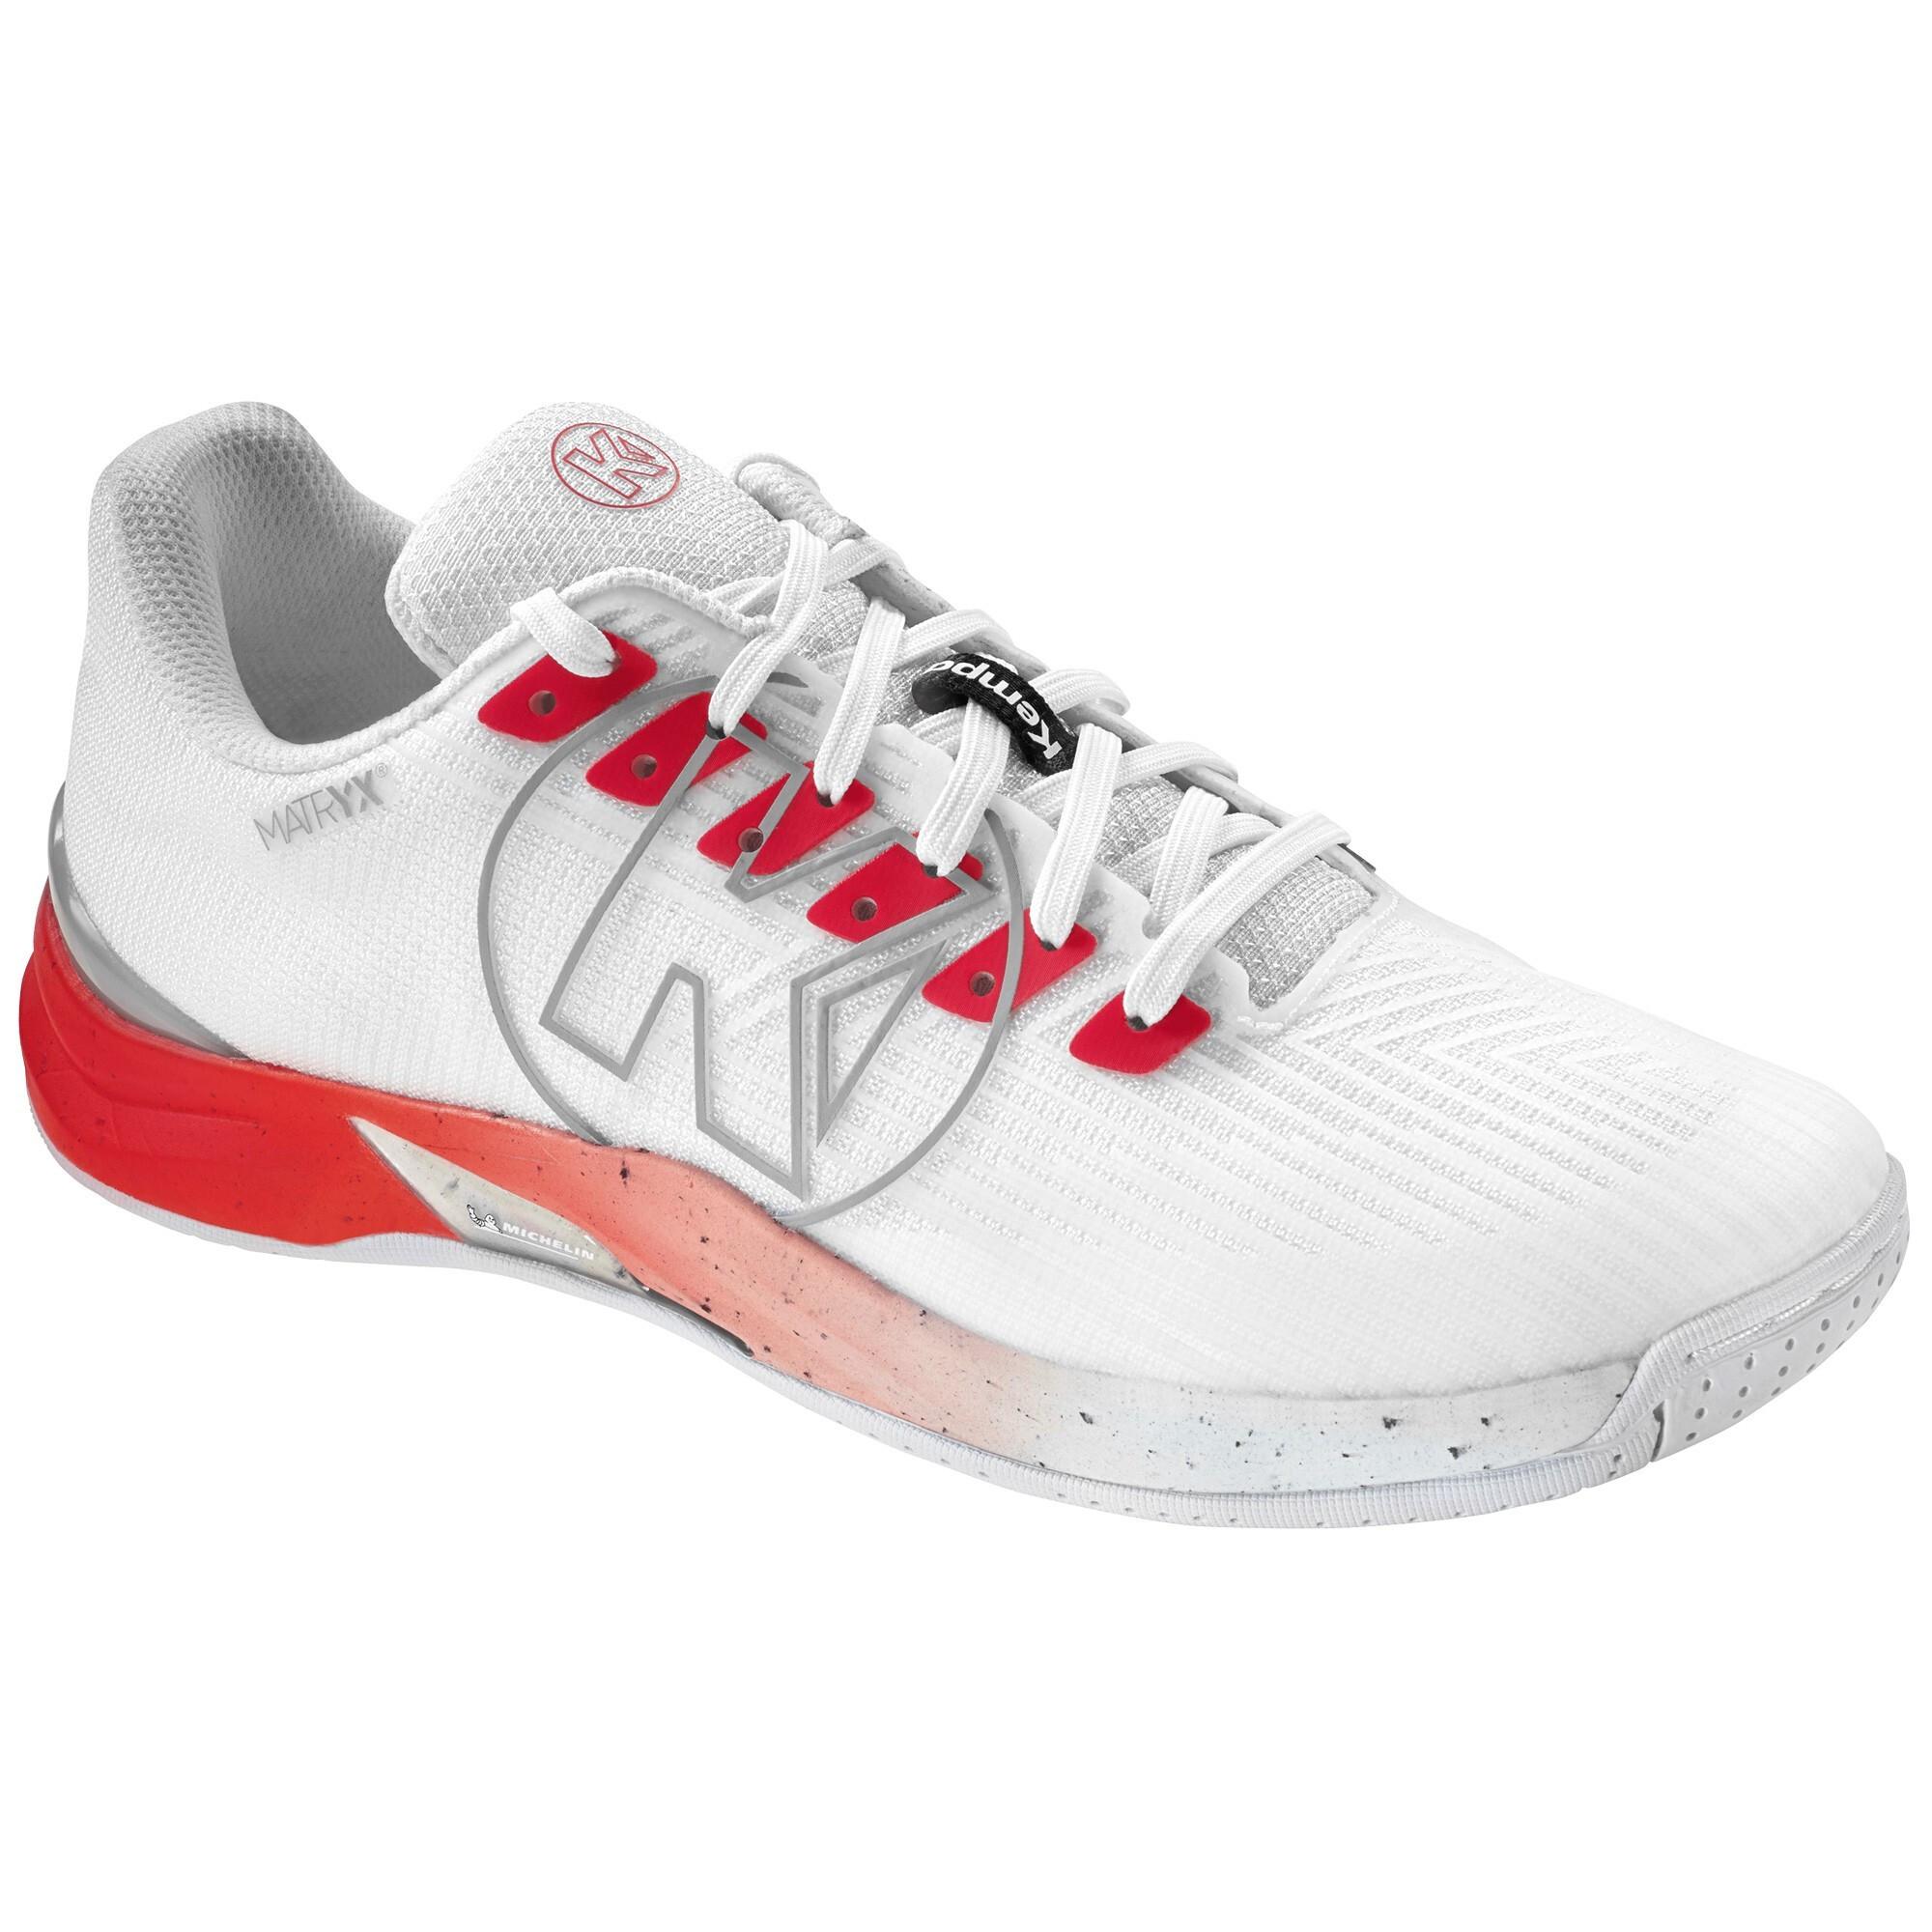 Kempa  chaussures indoor   attack pro 2.0 